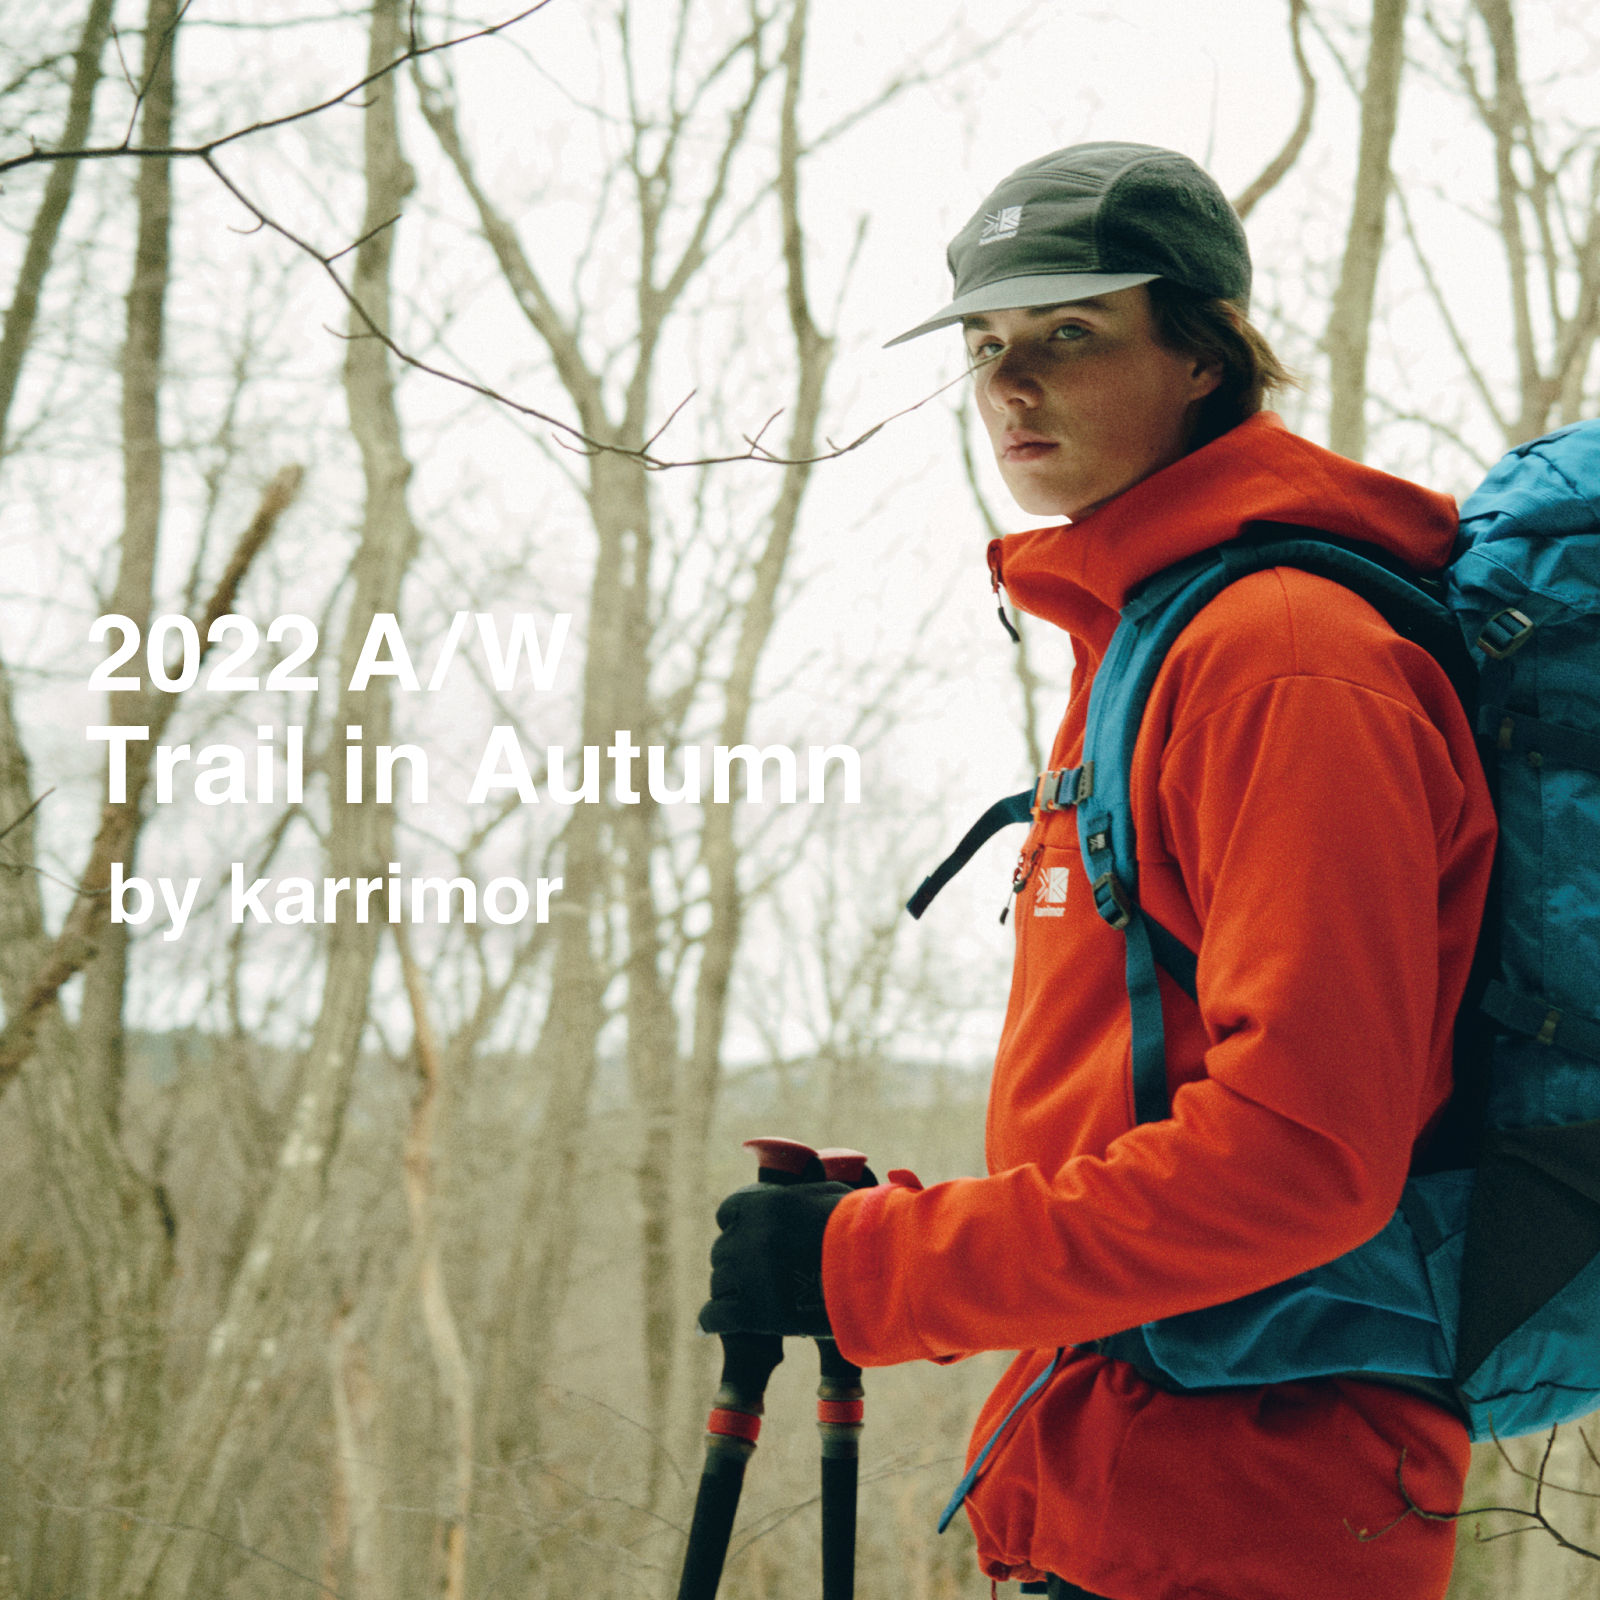 2022A/W Trail in Autumn by karrimor